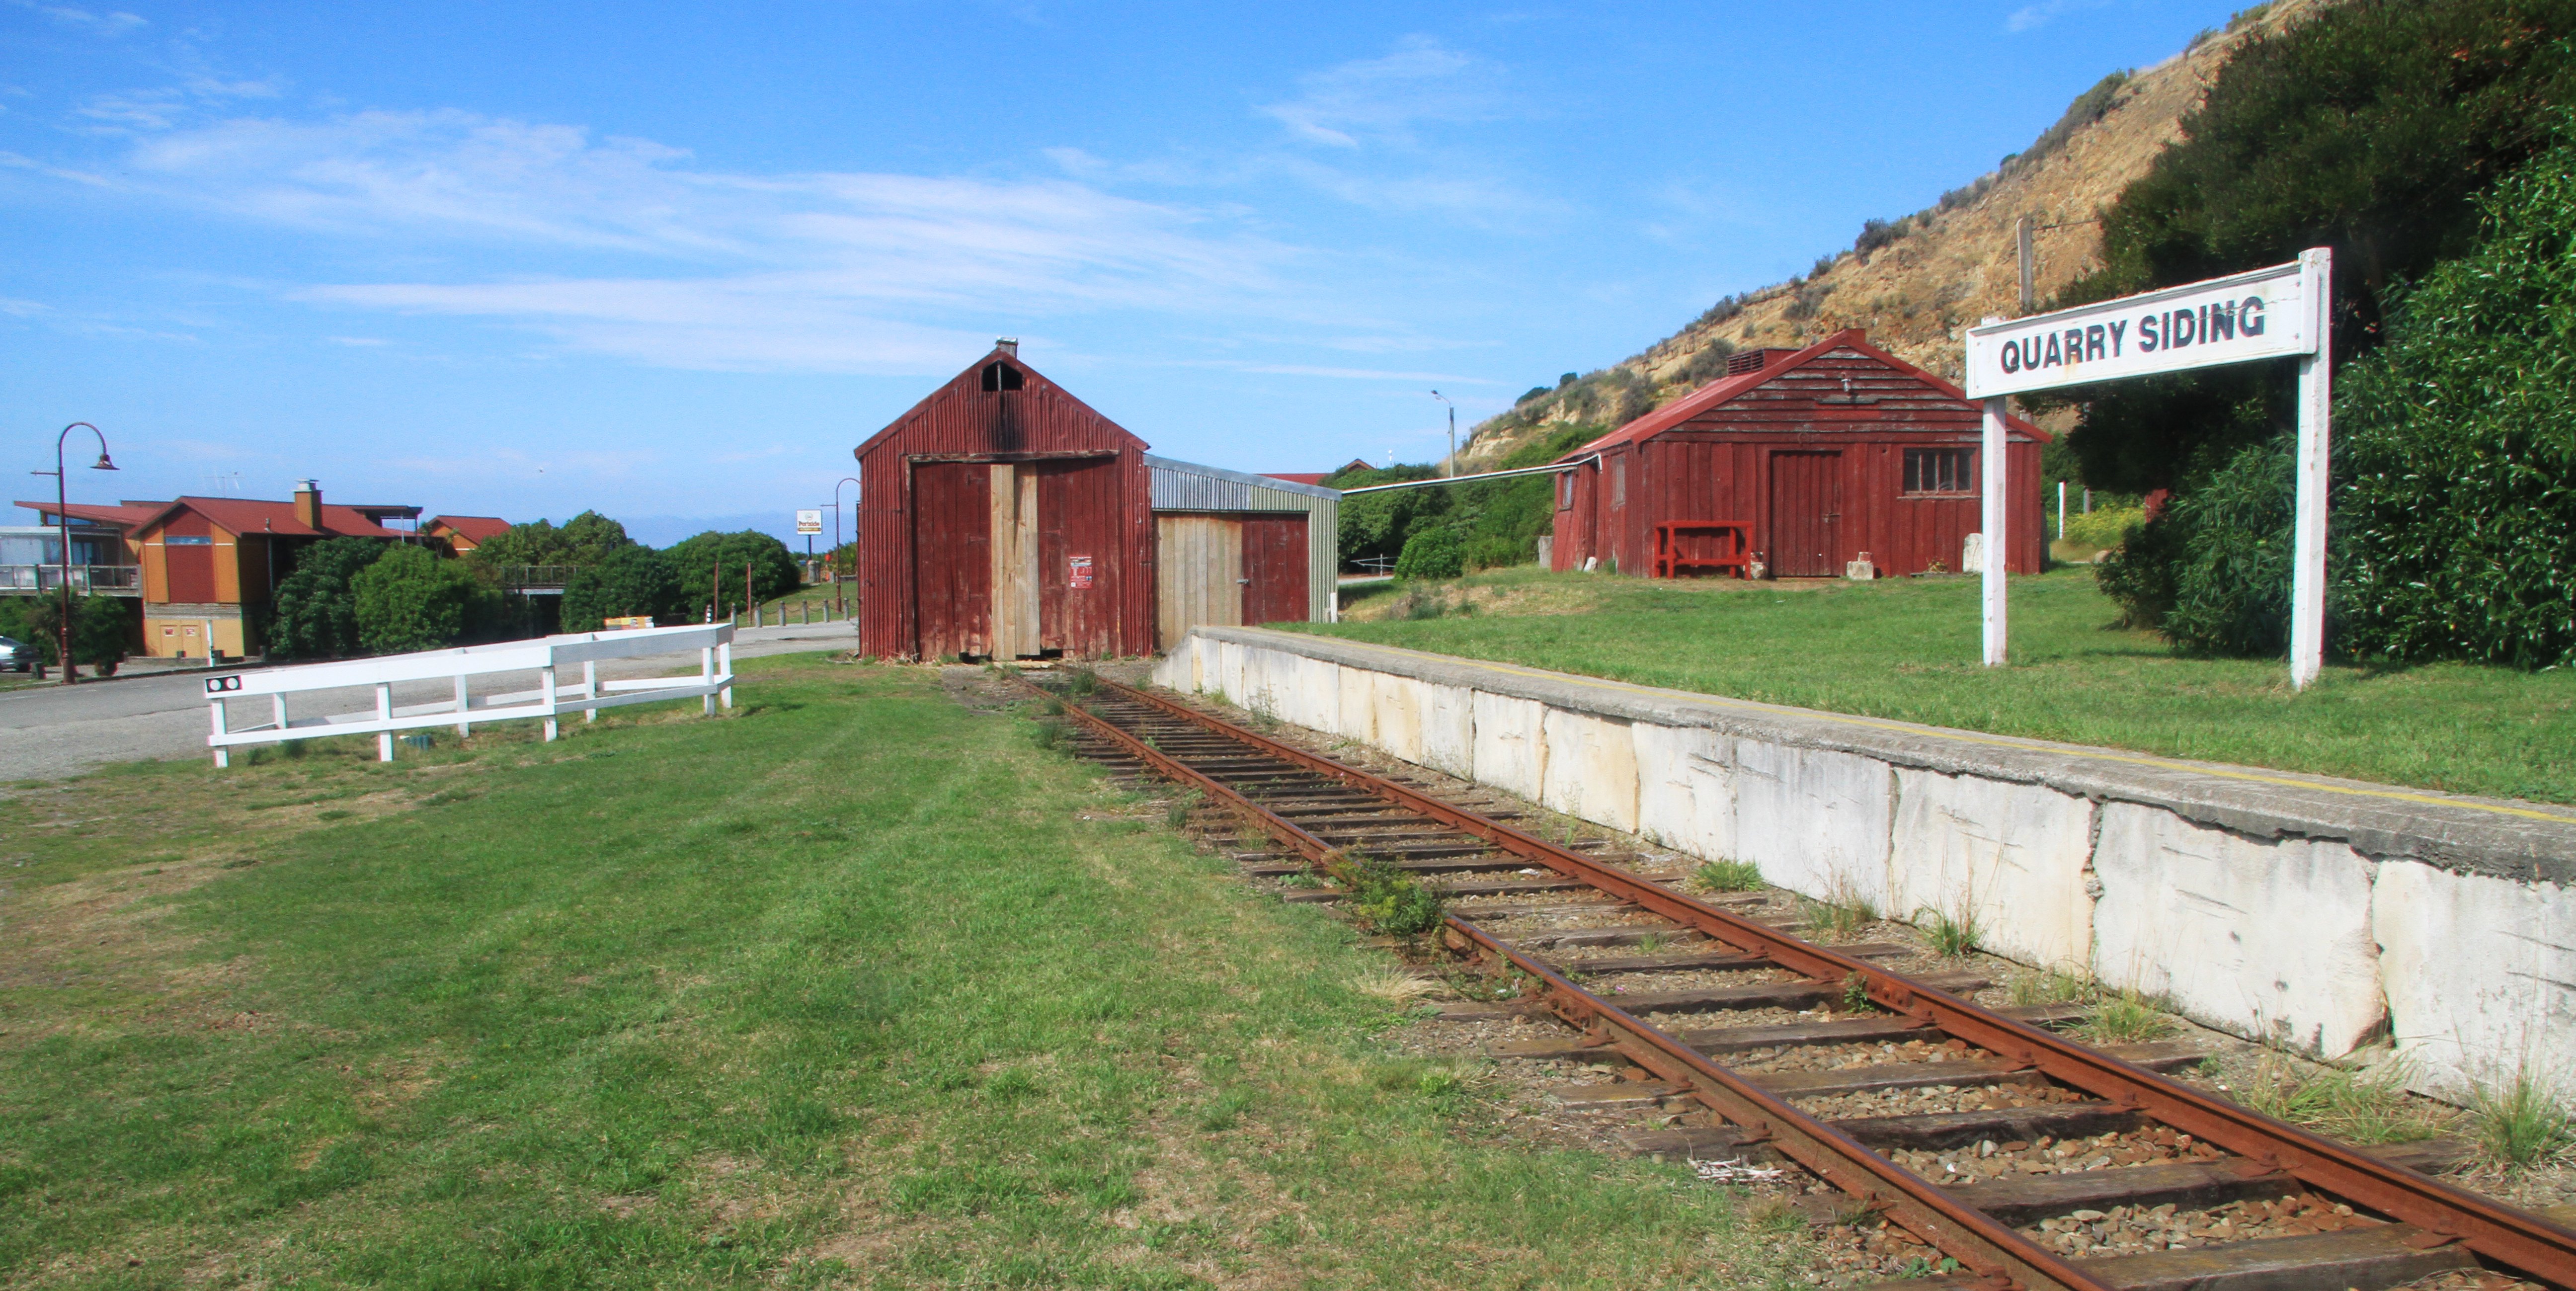 Oamaru Steam and Rail general manager Harry Andrew says he has to upgrade the society's Quarry Siding station to bring 300 Dunedin Railway passengers on the society's Oamaru Harbour network out to the Oamaru Blue Penguin Colony this winter. Photos: Hamish